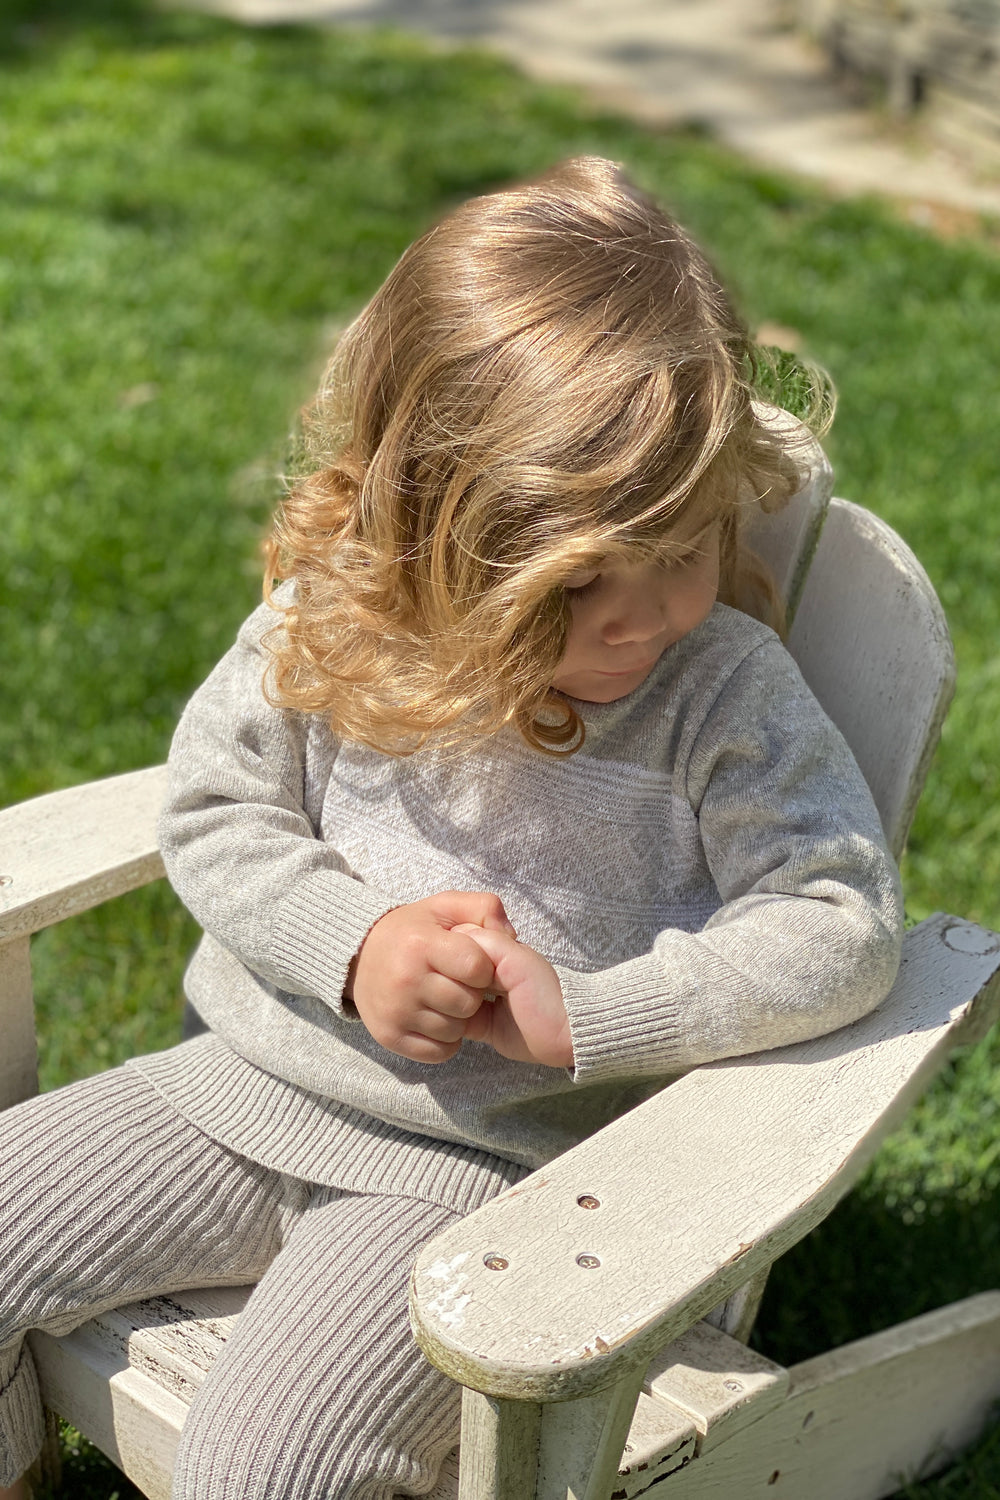 loop collection sustainable knit baby sweater made in usa from eco-friendly recycled cotton yarn